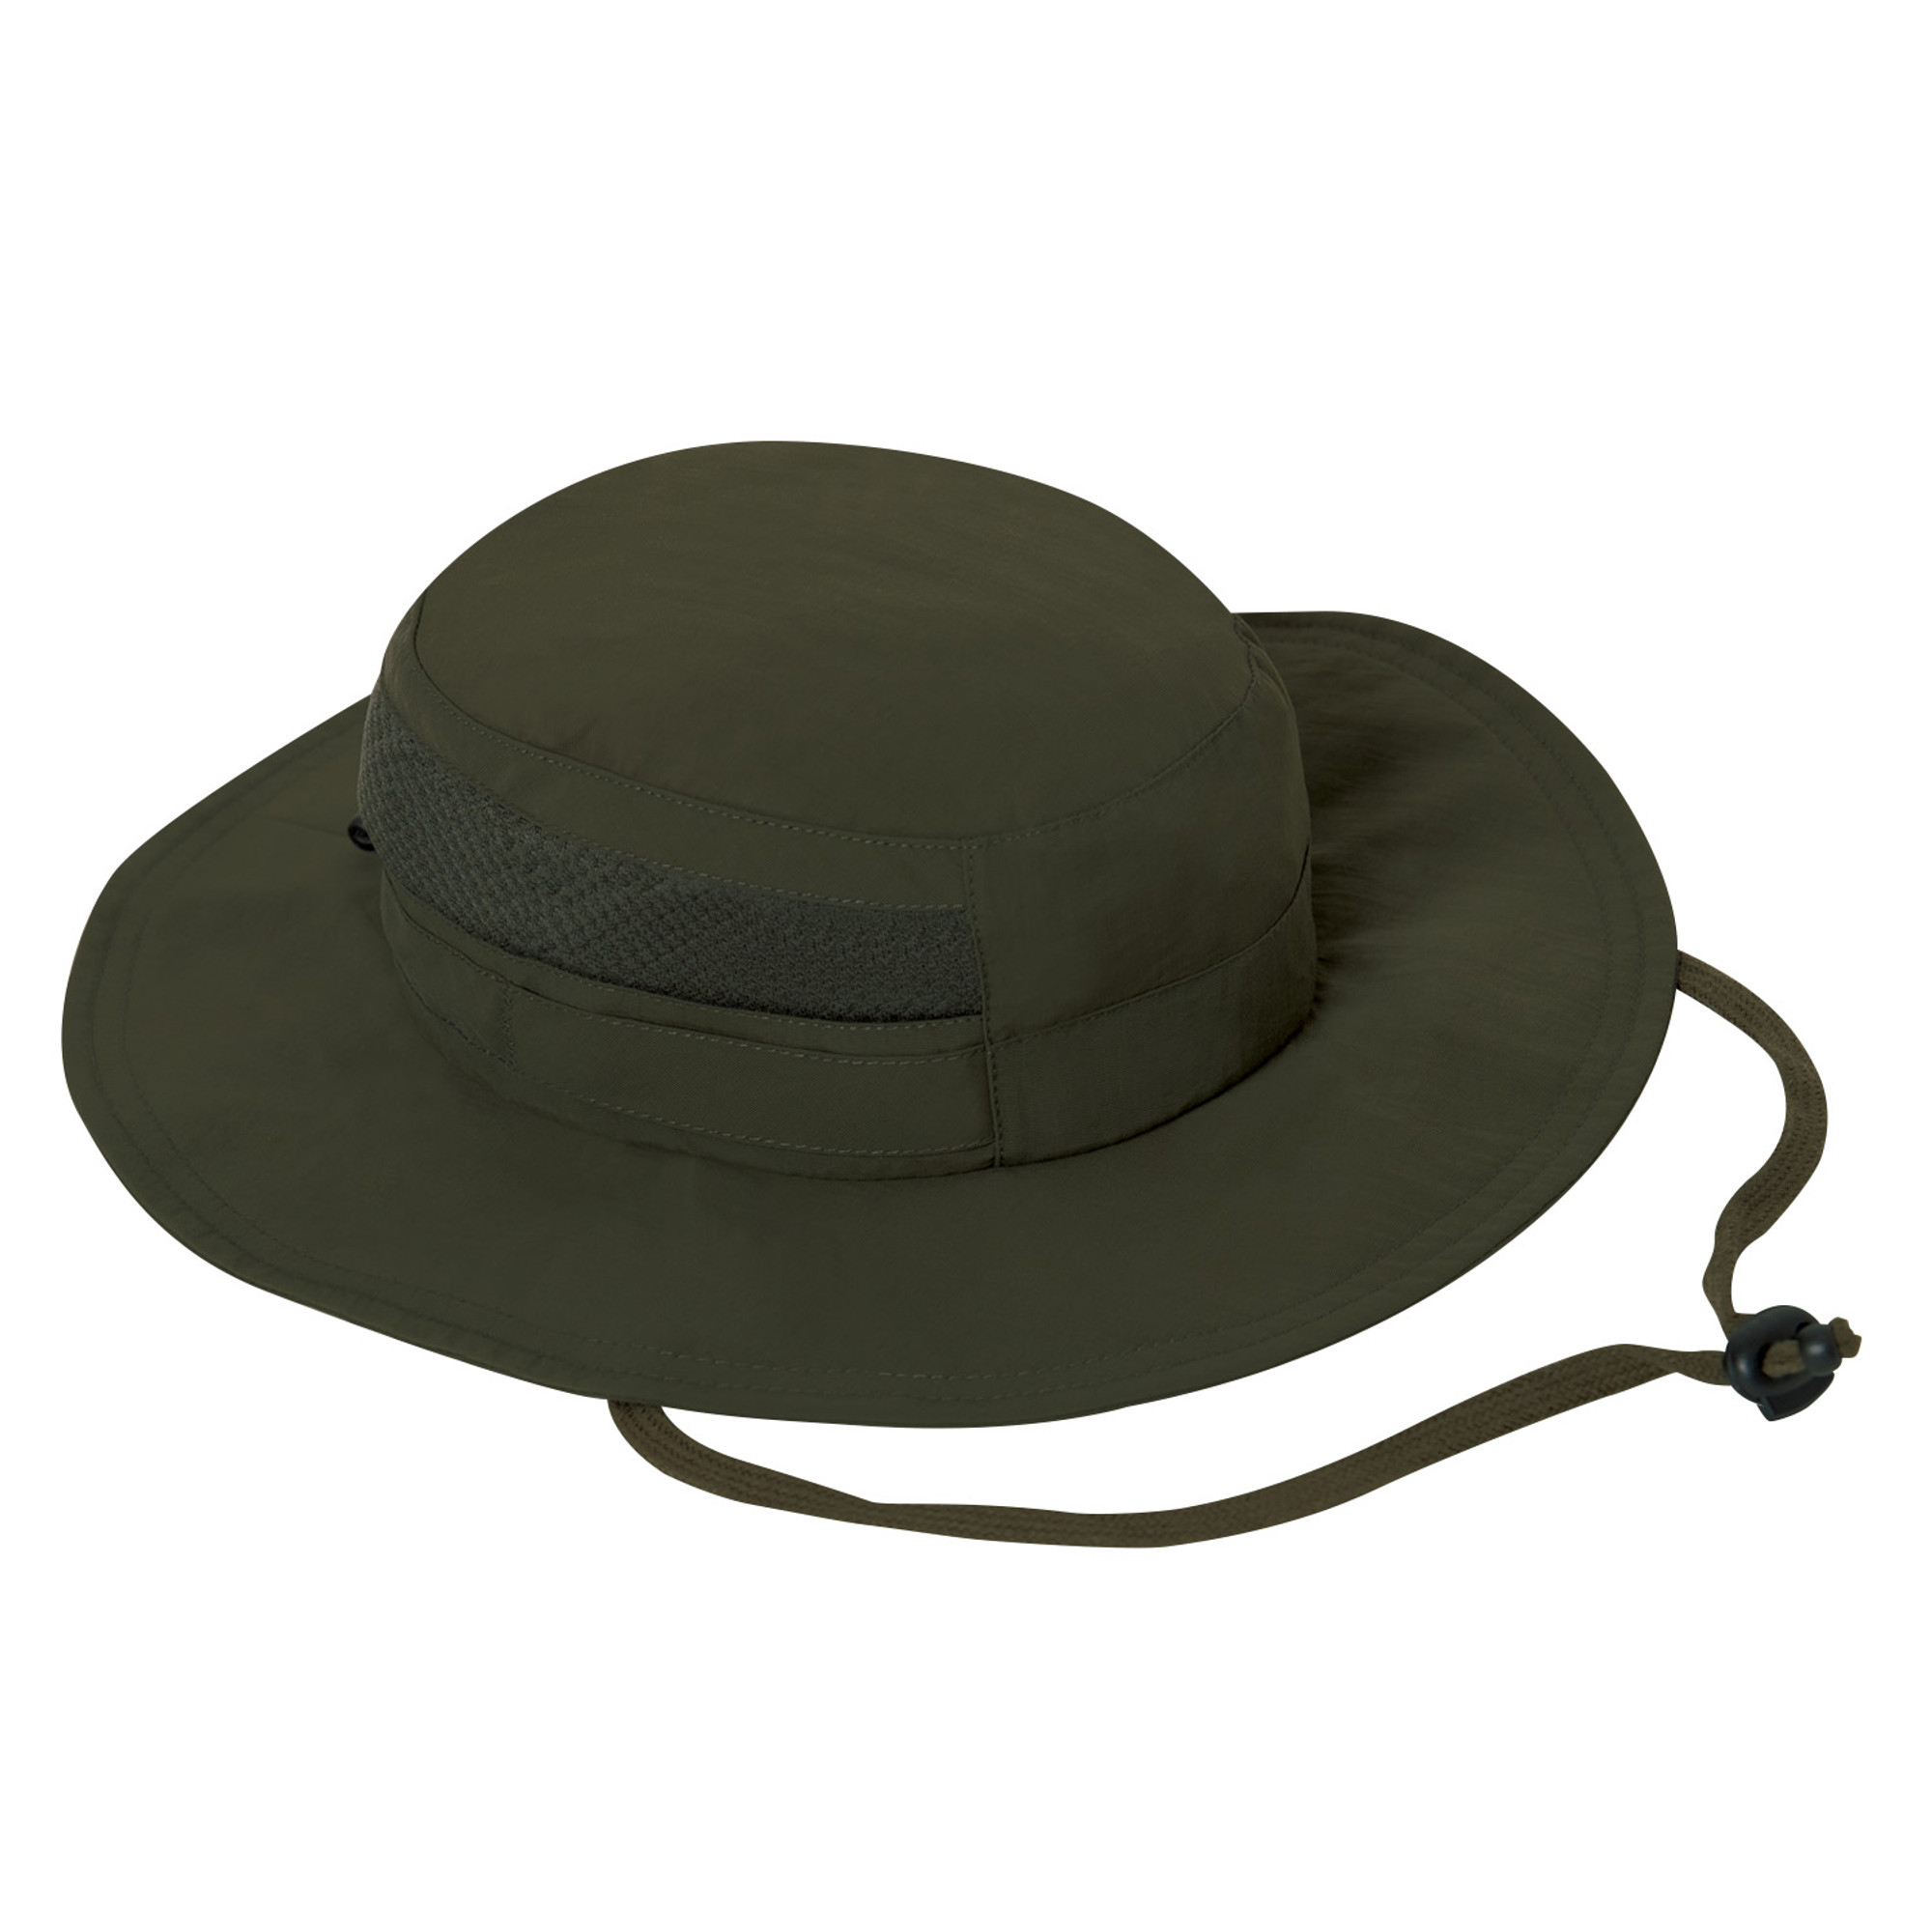 Rothco Lightweight Adjustable Mesh Boonie Hat - Olive Drab